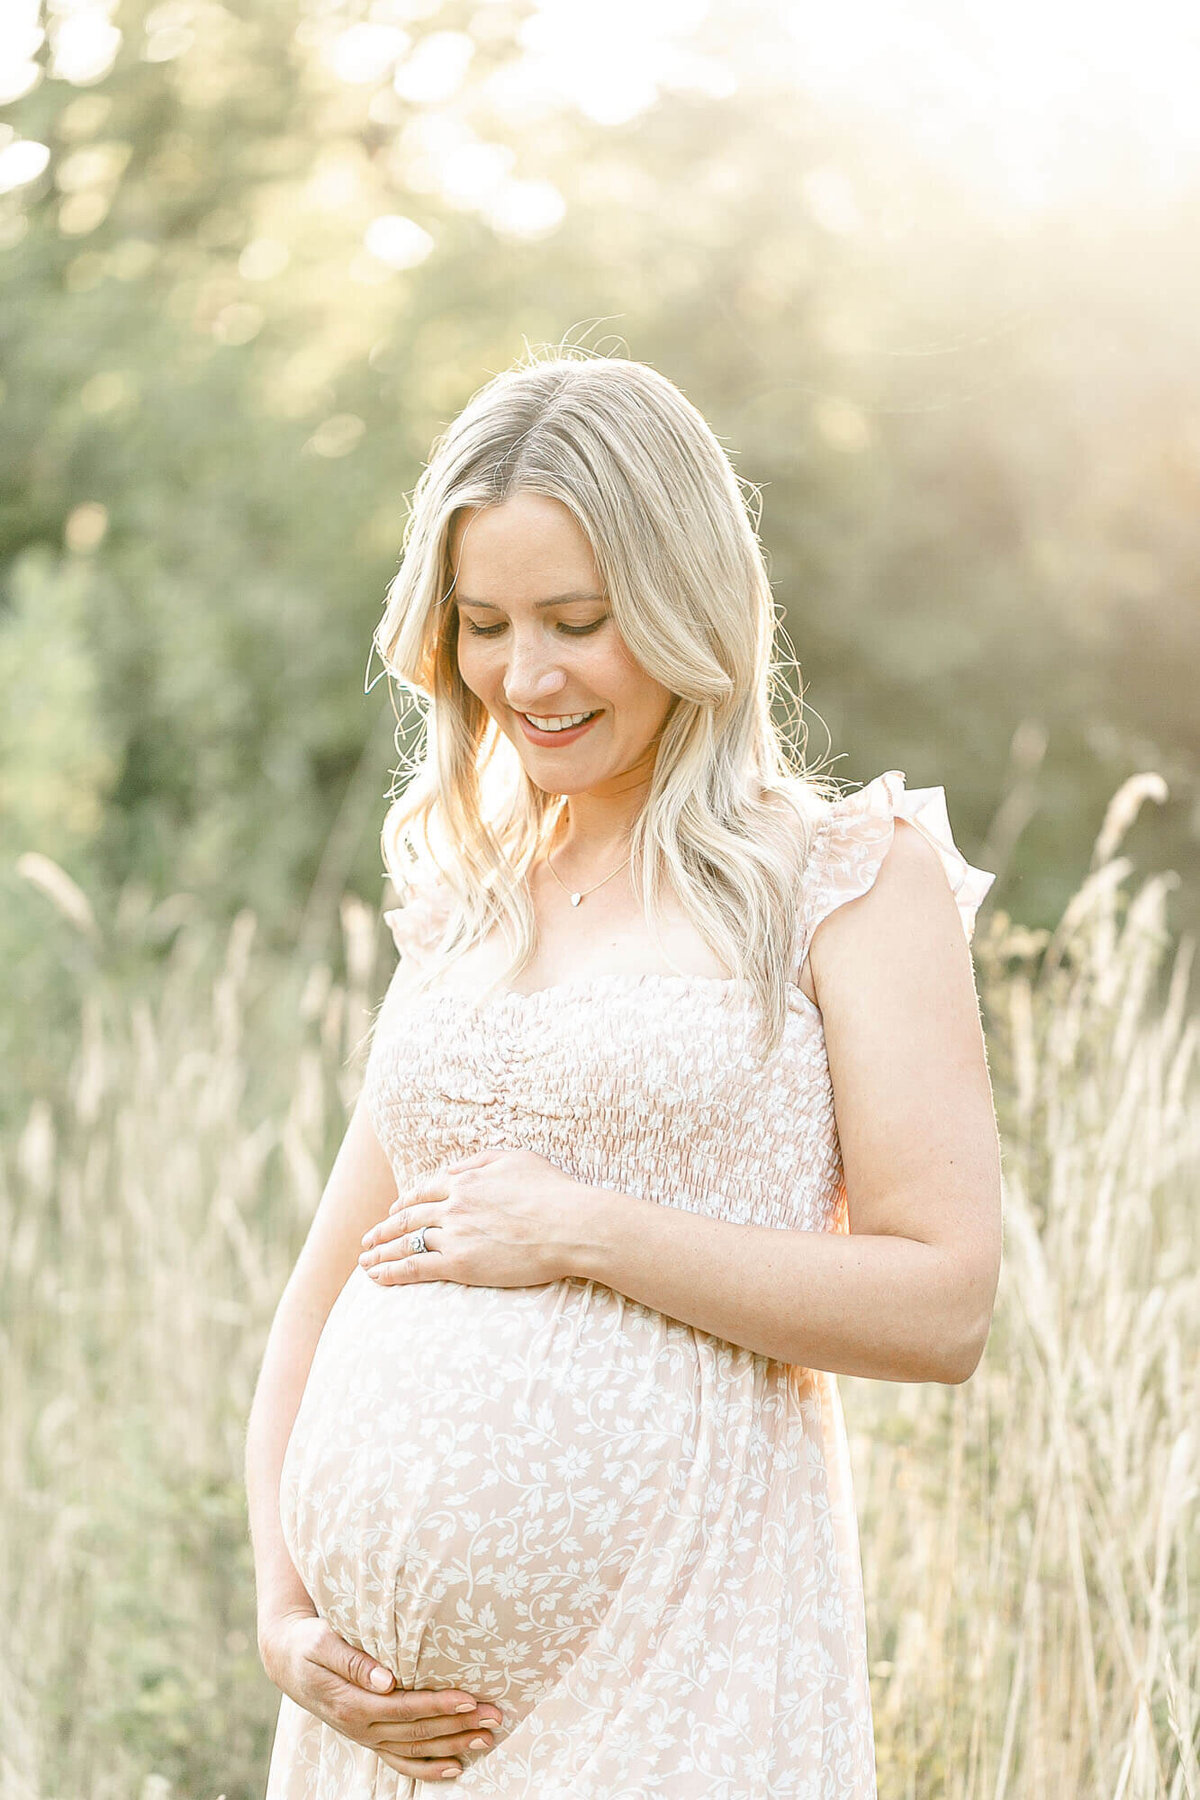 Mama holding her baby bump and looking down and smiling. She is holding her belly and wearing a beige colored floral dress and standing in a field of tall golden grasses at sunset